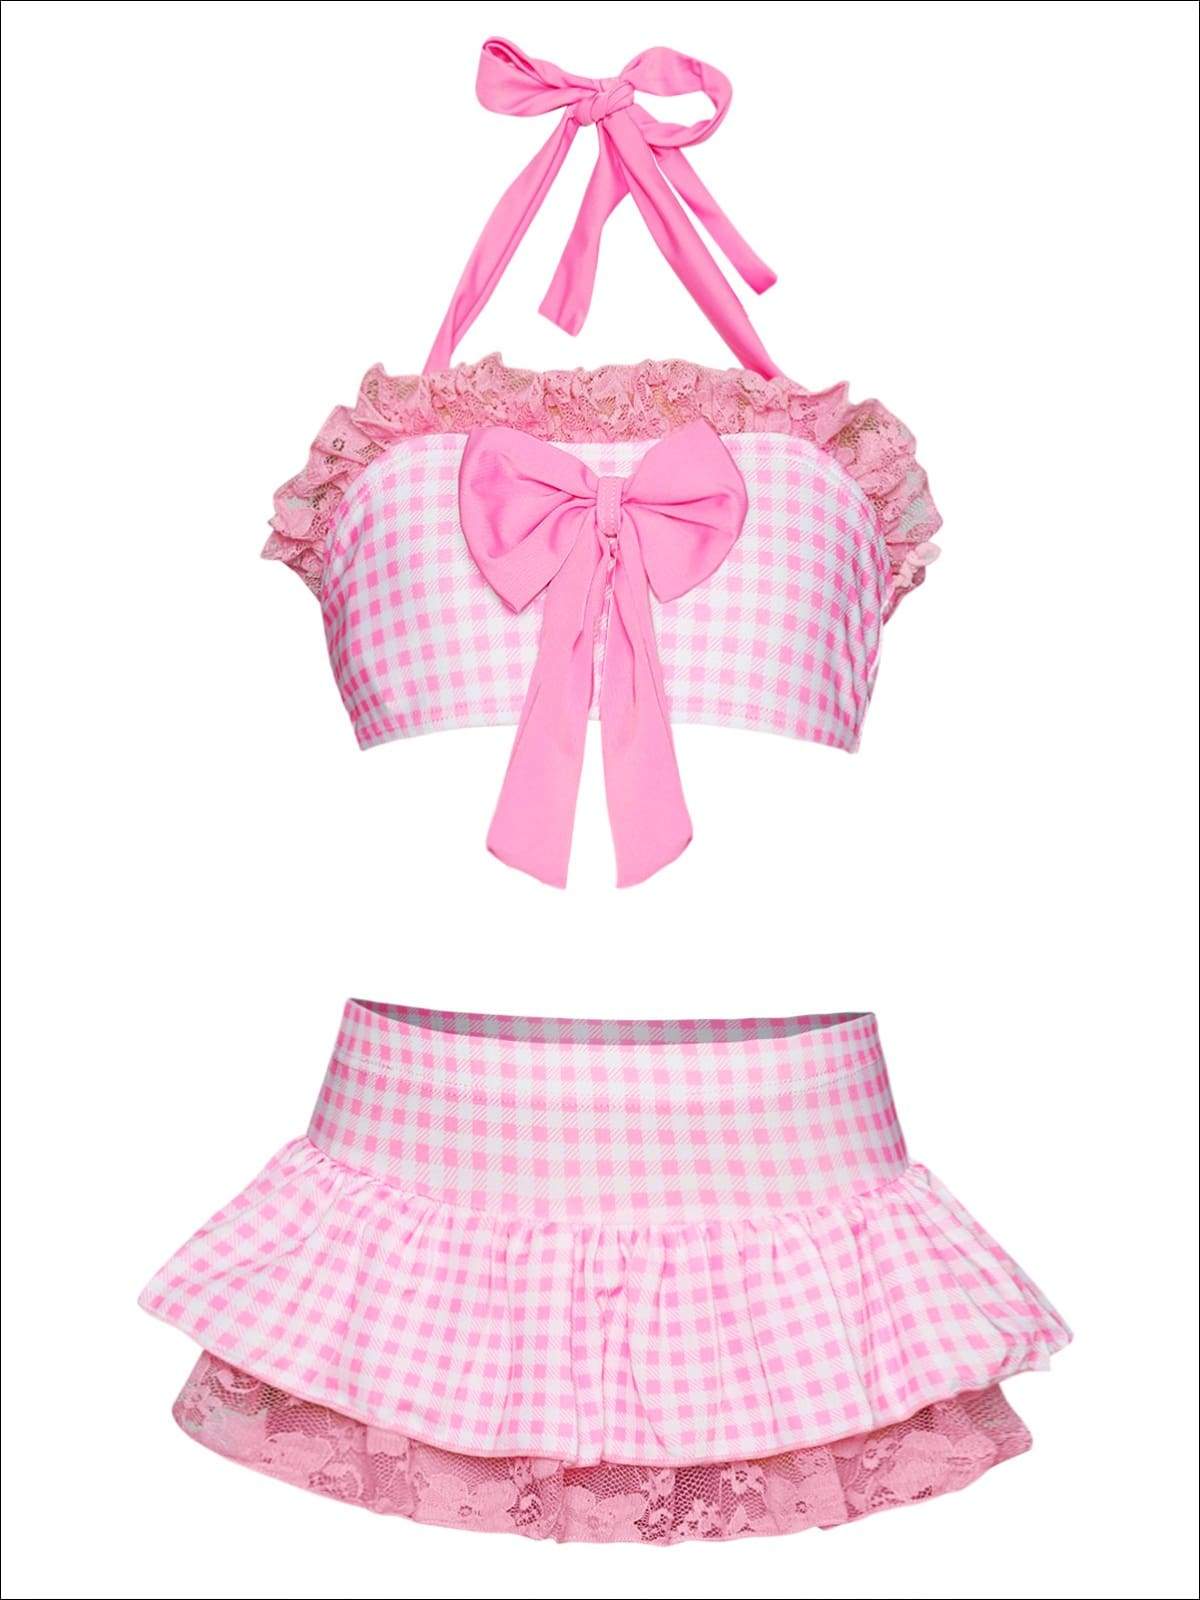 Girls Skirted Gingham Halter with Bow Detail & Eyelet Trim Swimsuit - Pink / 2T/3T - Girls Two Piece Swimsuit